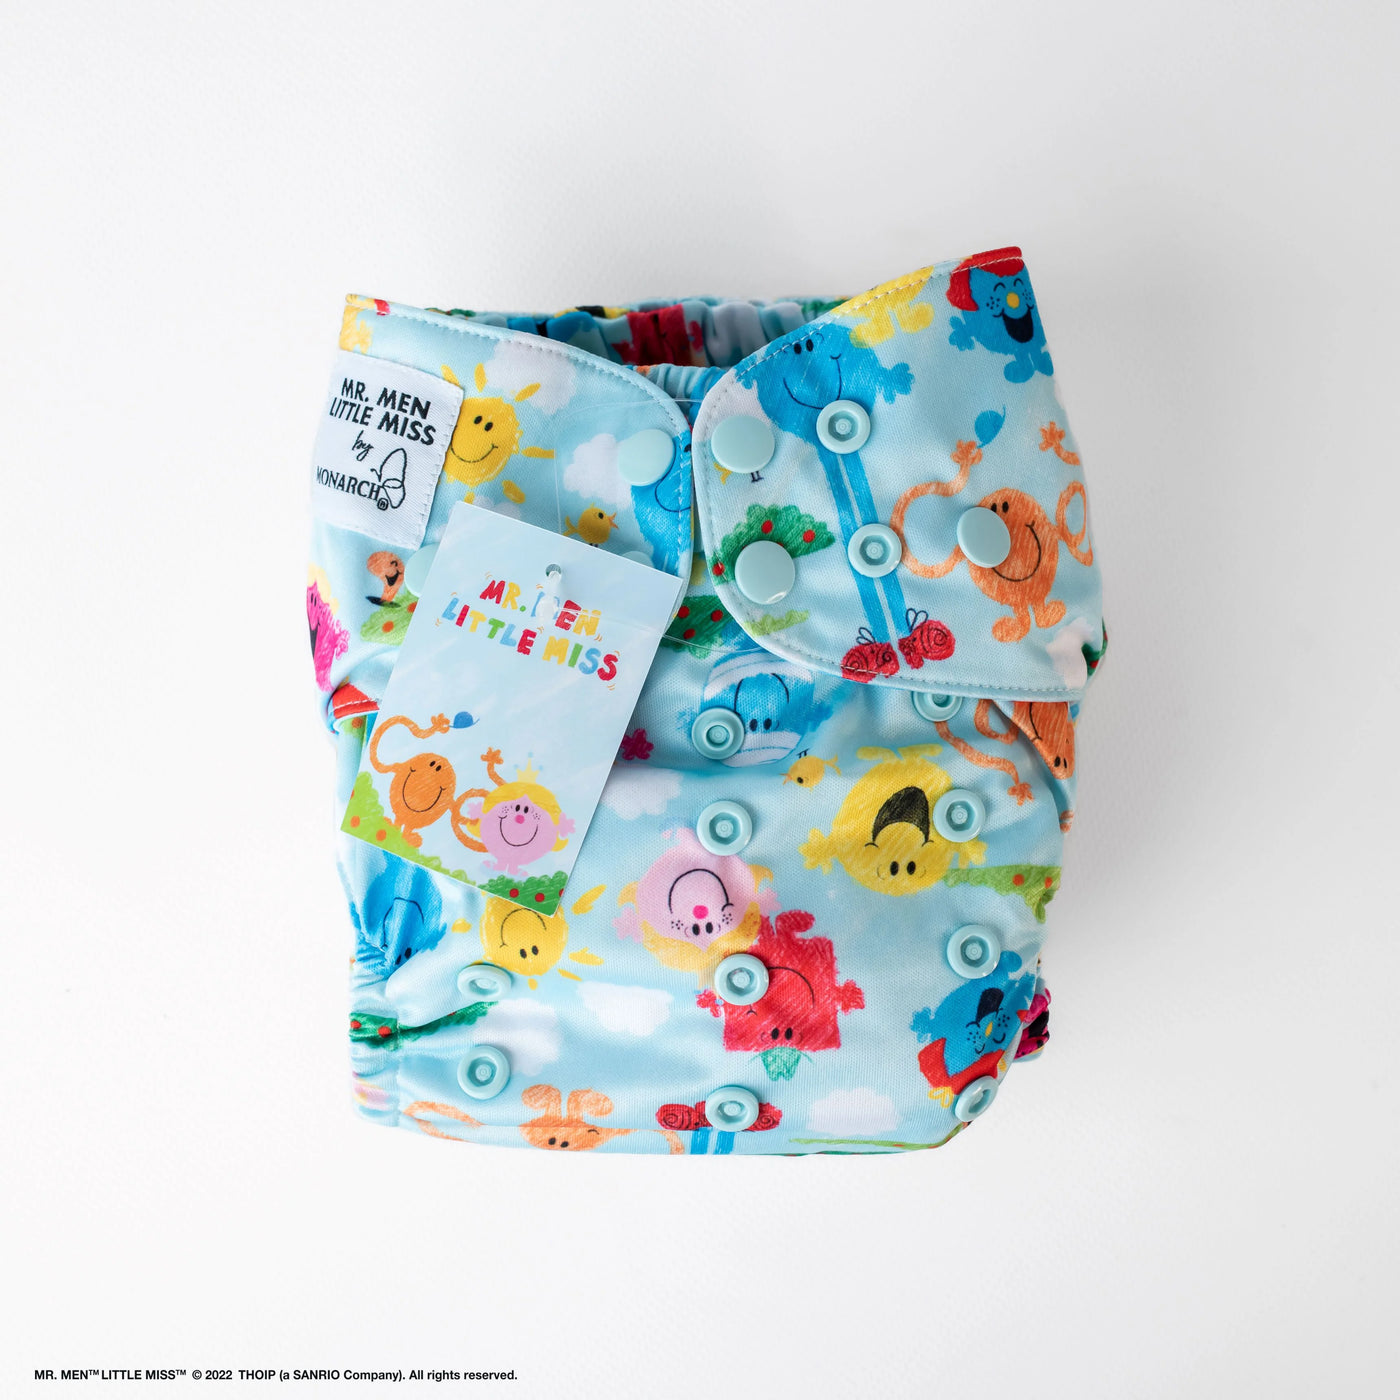 Monarch Classic Reusable Cloth Nappy 2.0 With Snaps Mr Men Little Miss - Playing With Crayons